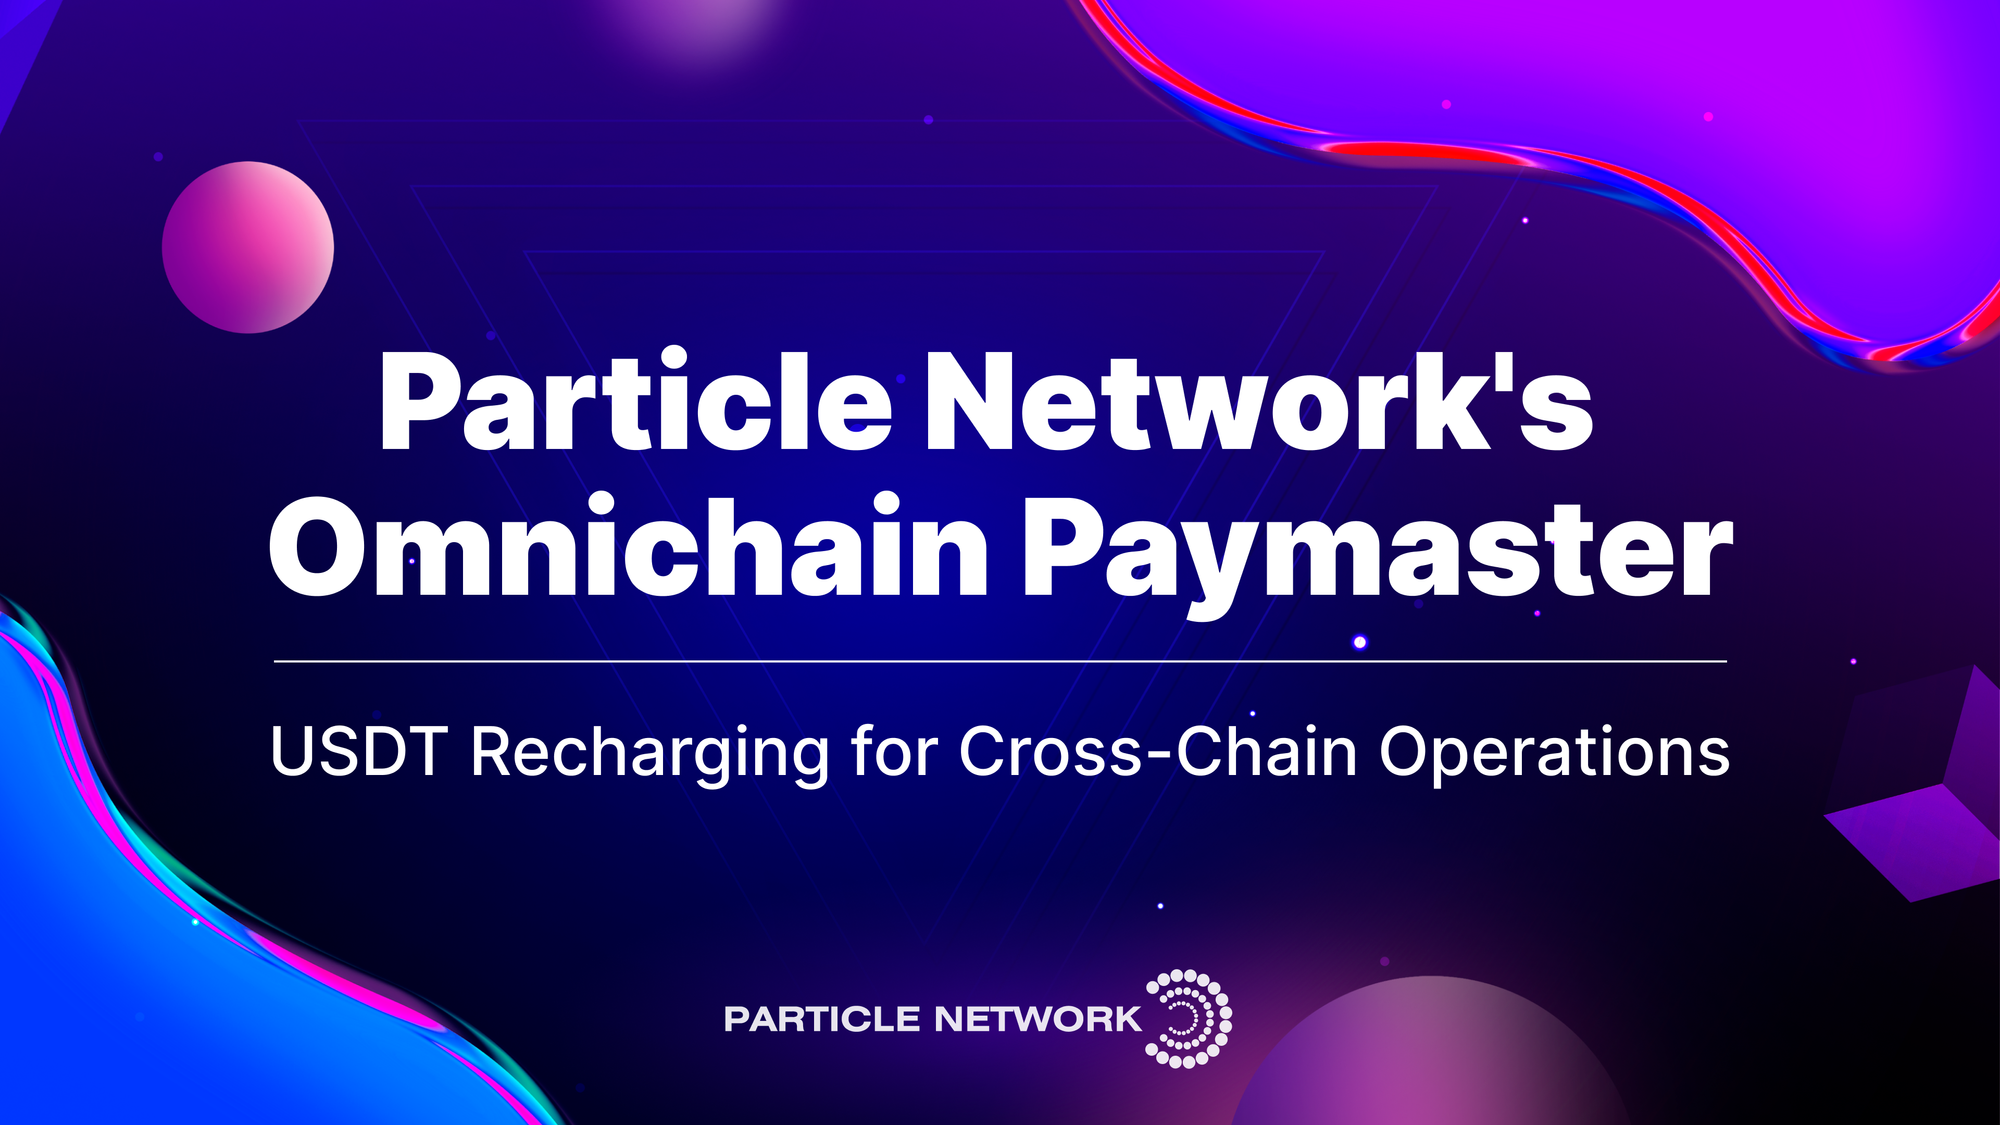 Introducing Particle Network’s Omnichain Paymaster: Cross-Chain Gas Sponsorships